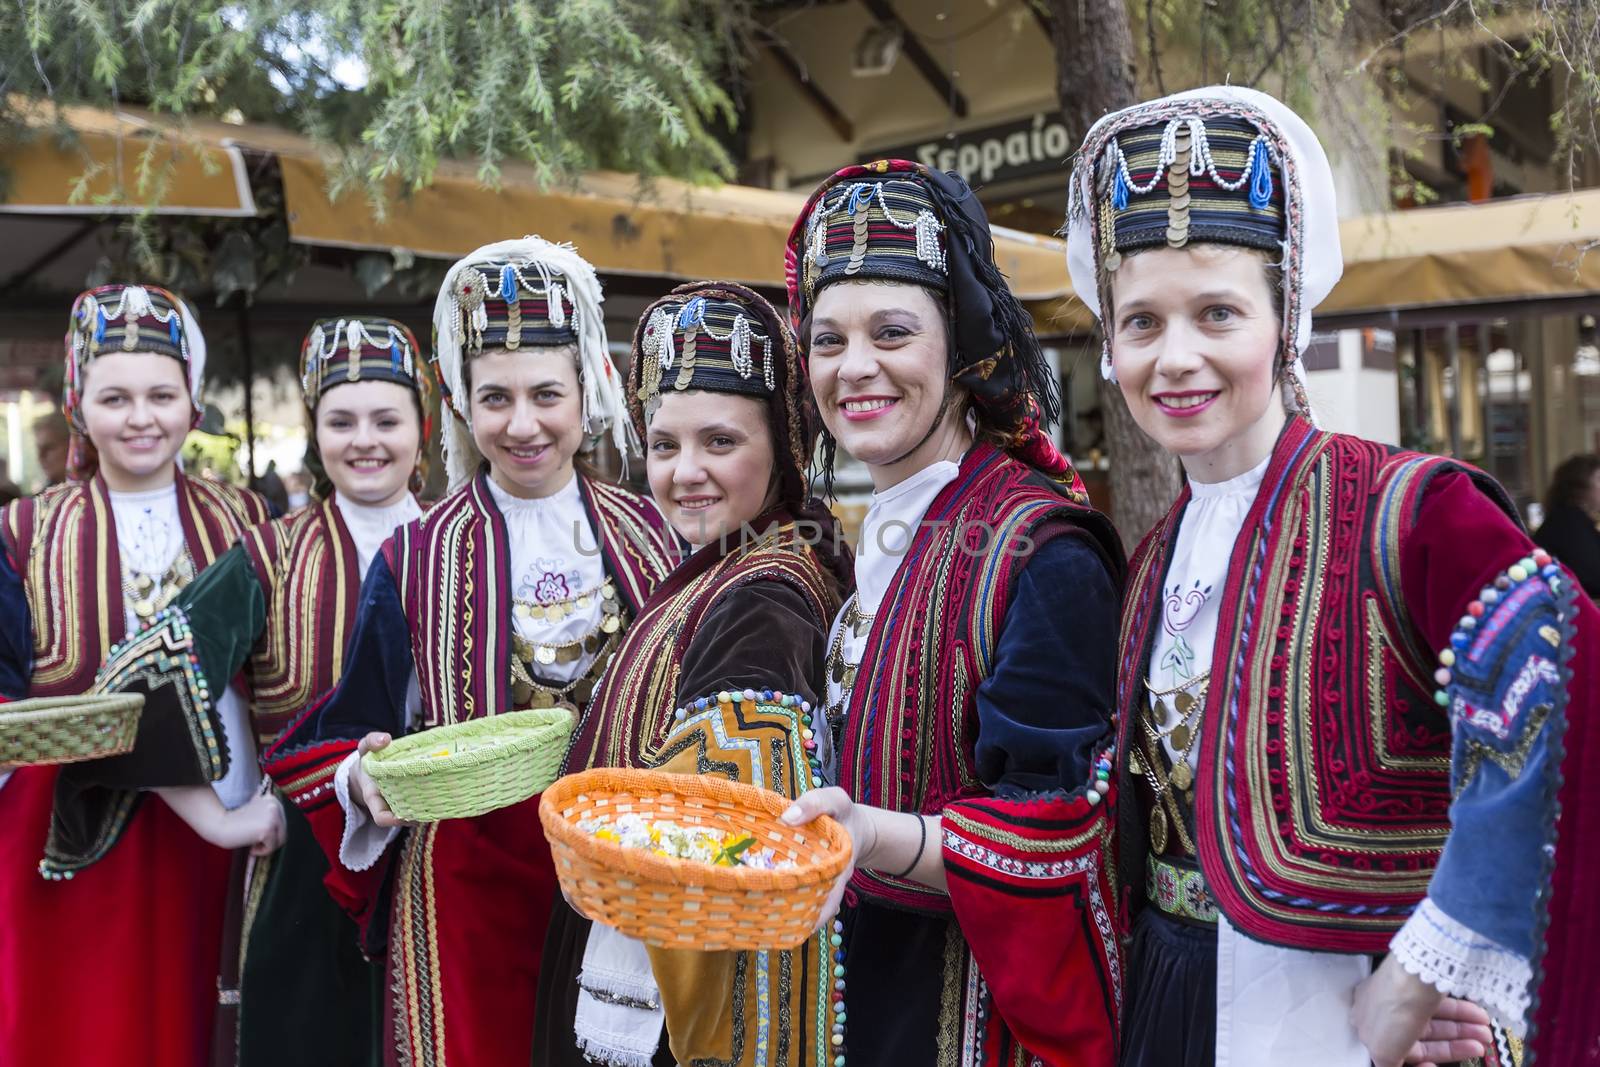 Folk dancers from the Crete club at the parade in Thessaloniki, by ververidis